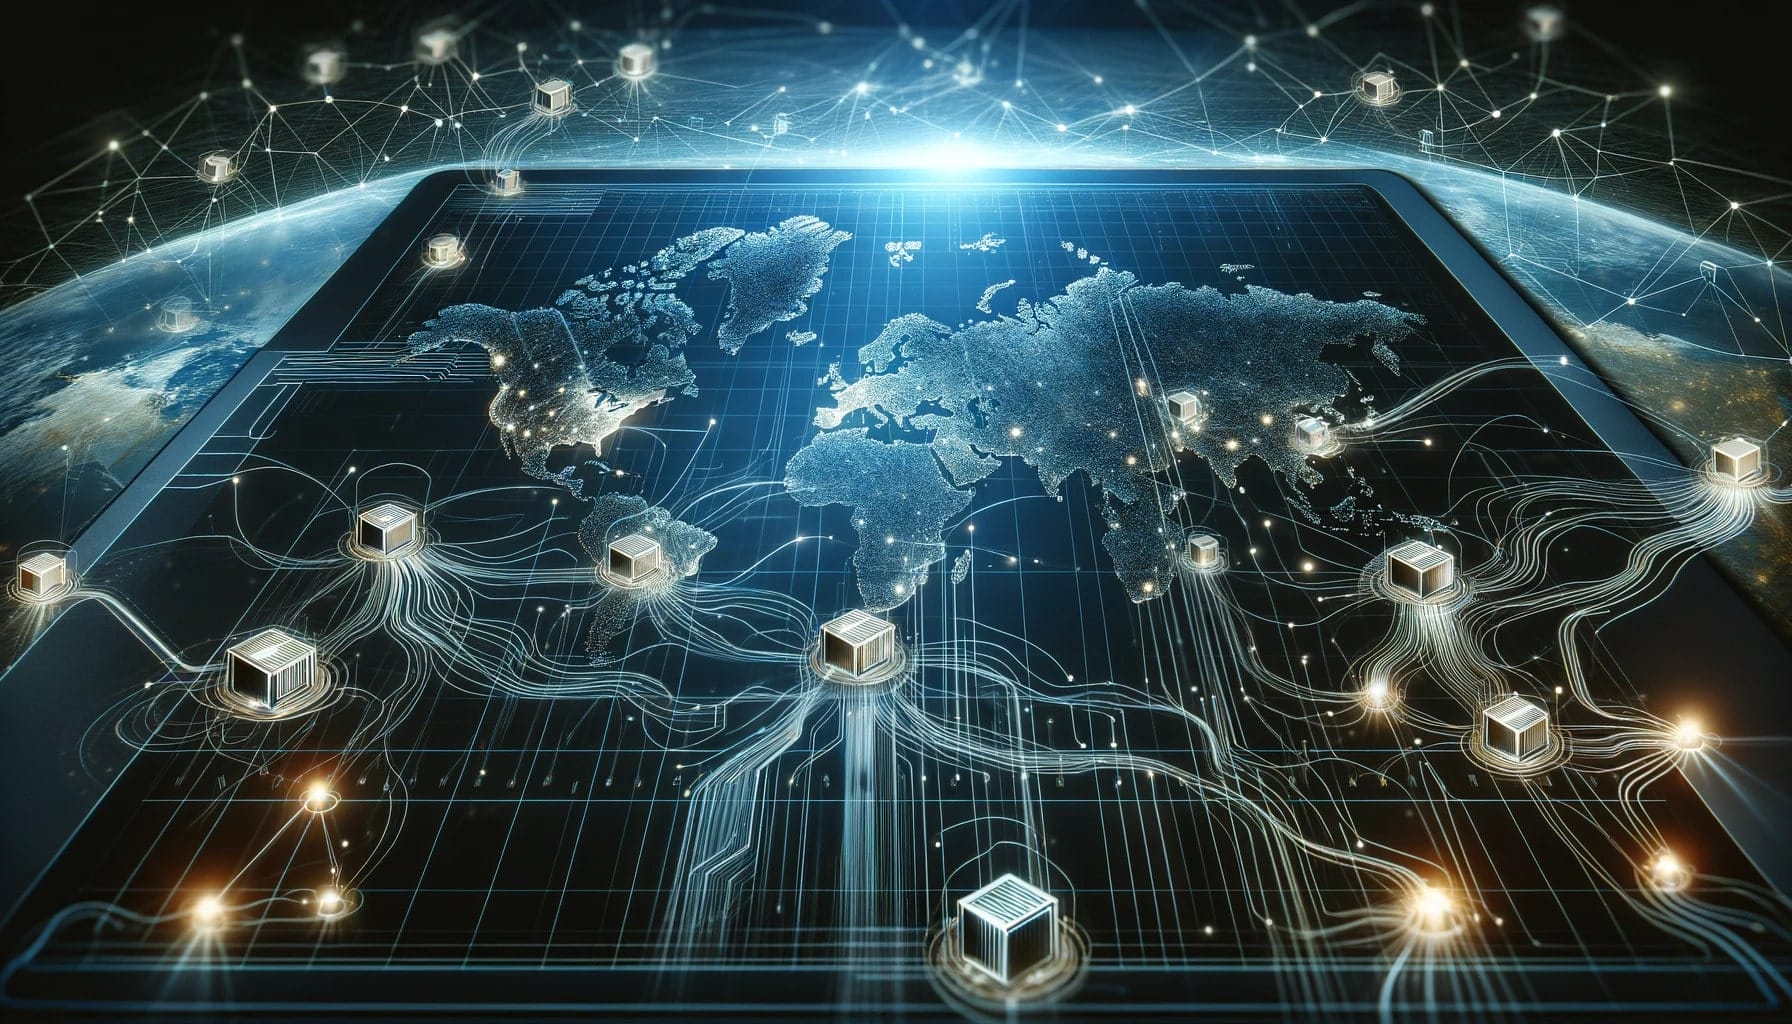 Digital global logistics network with interconnected warehouse nodes and flowing data lines, representing Big Data optimisation in supply chain management.